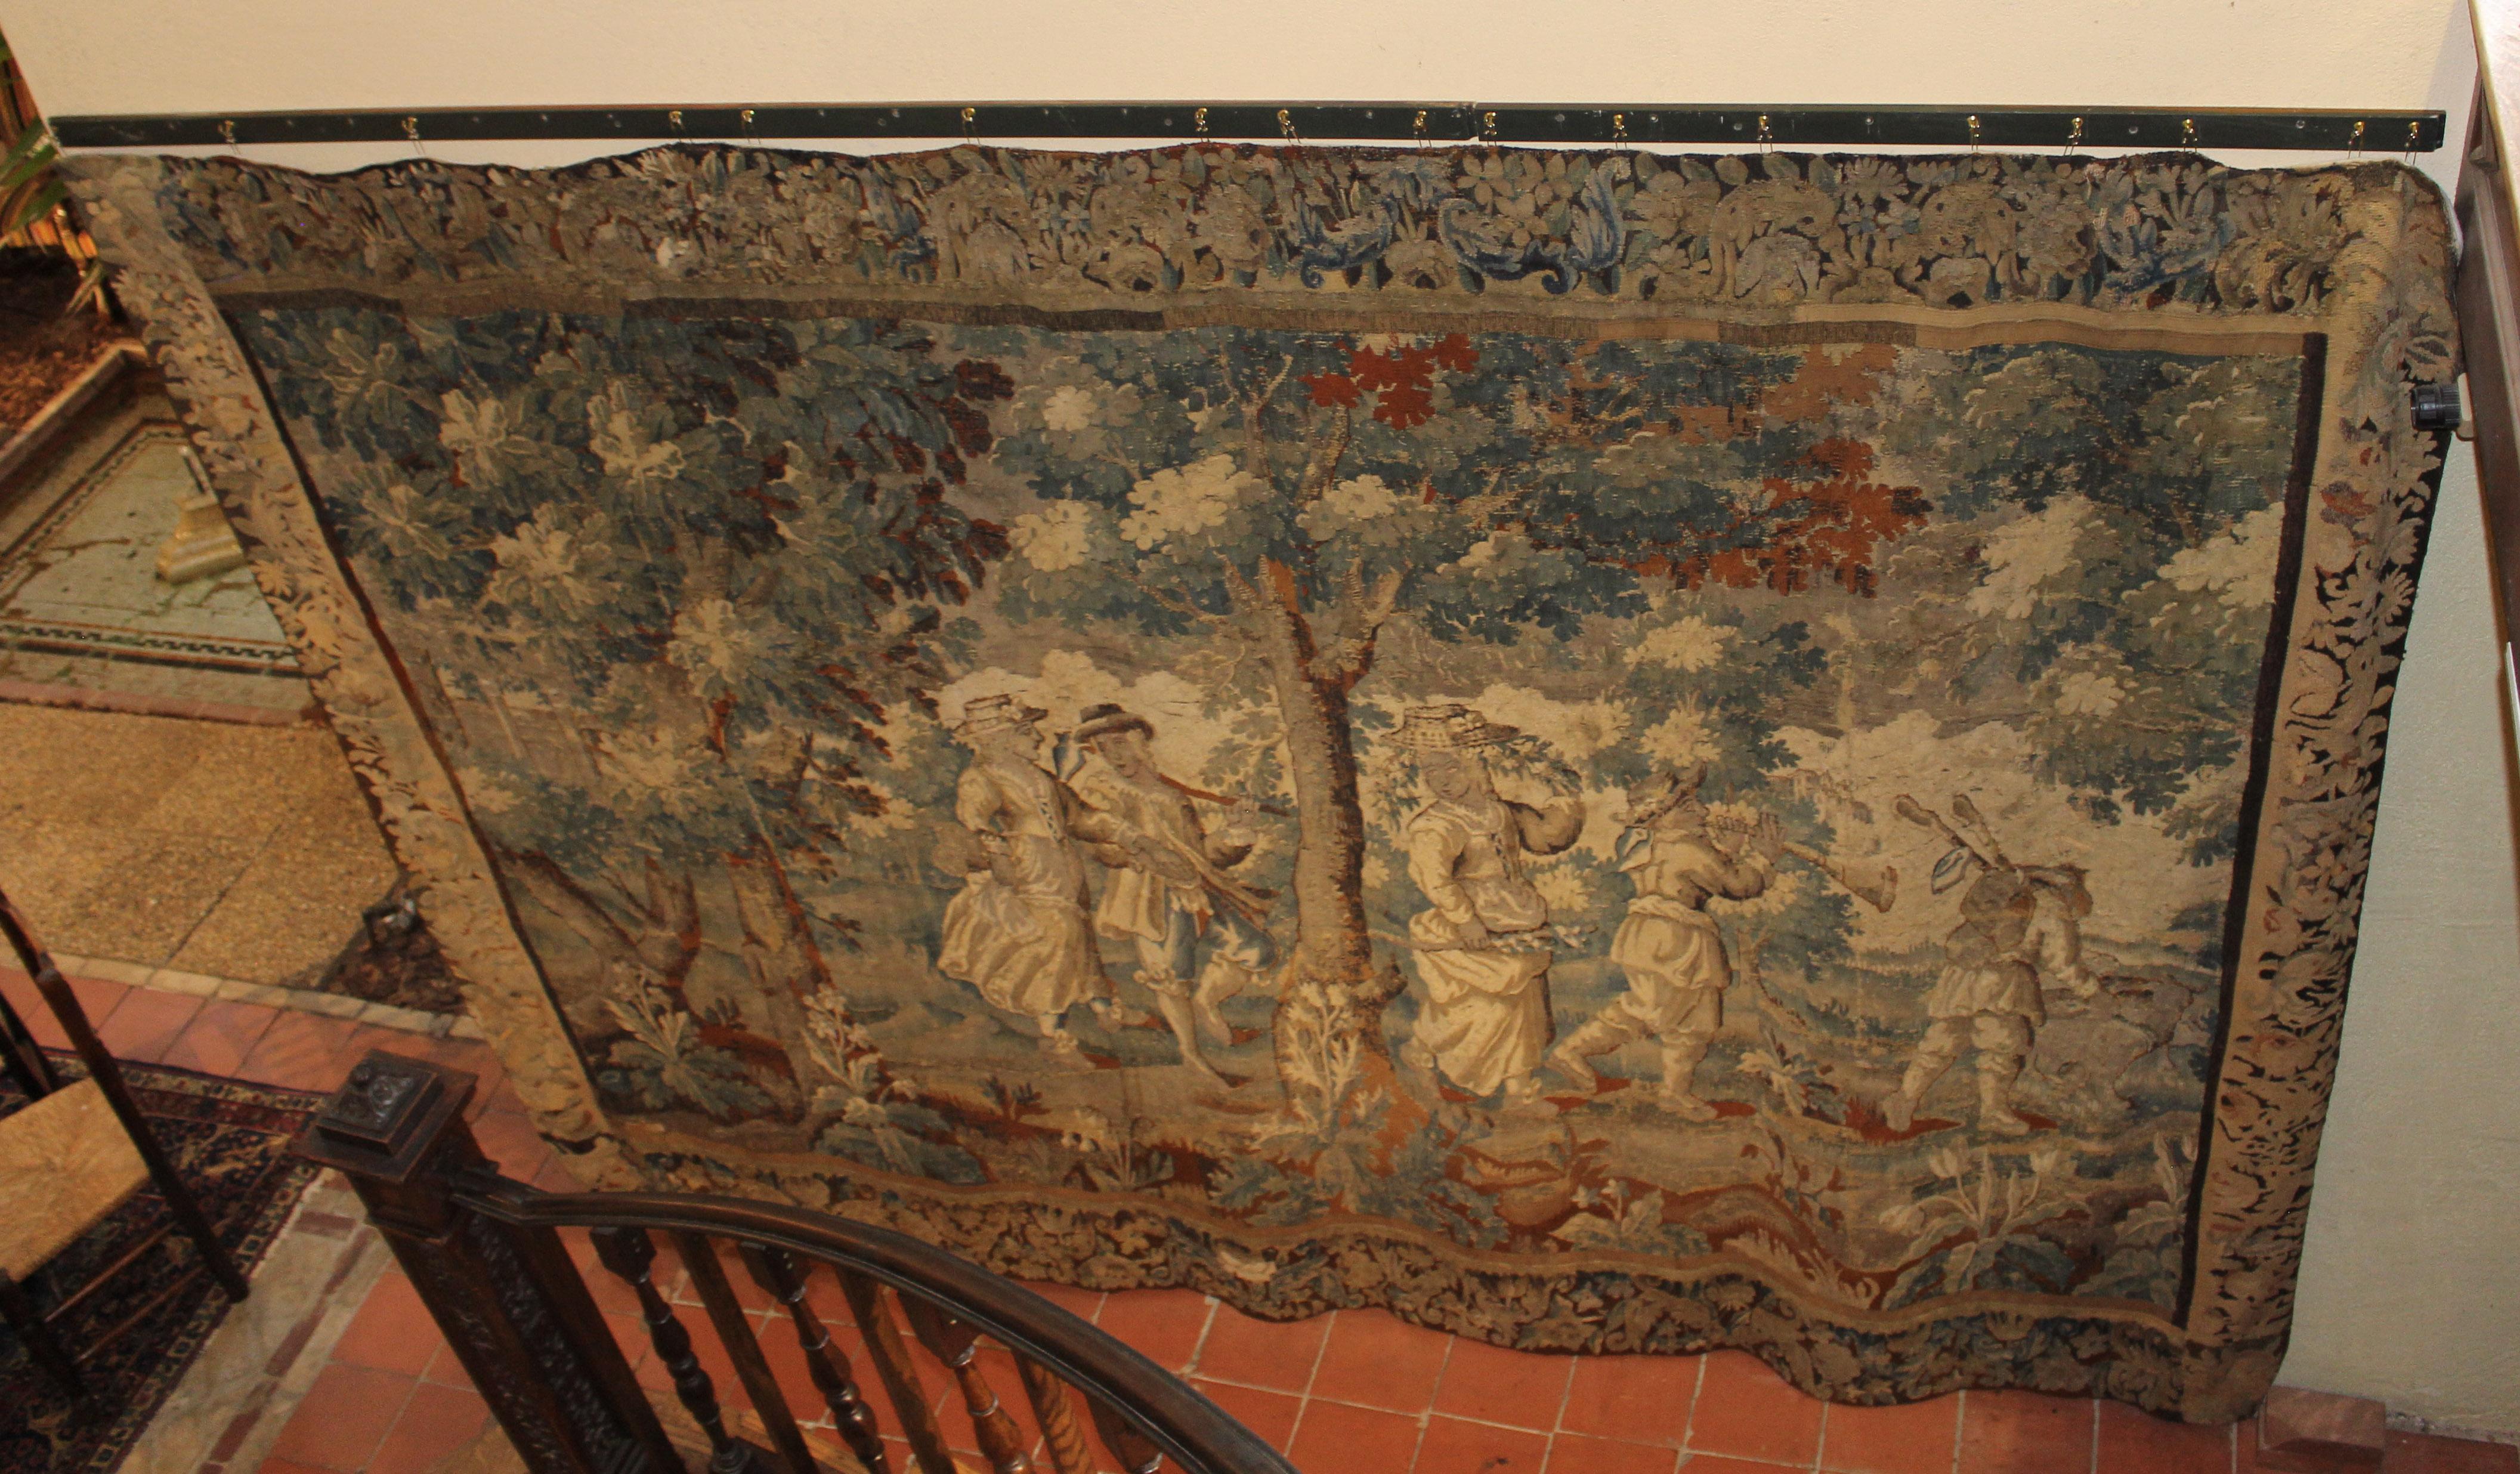 Late 17th to early 18th century Aubusson tapestry, Continental. Displaying a Spring procession into the garden with implements, etc. Likely part of a series or even larger tapestry given the contrasting borders. Faded, as expected given the age.
98